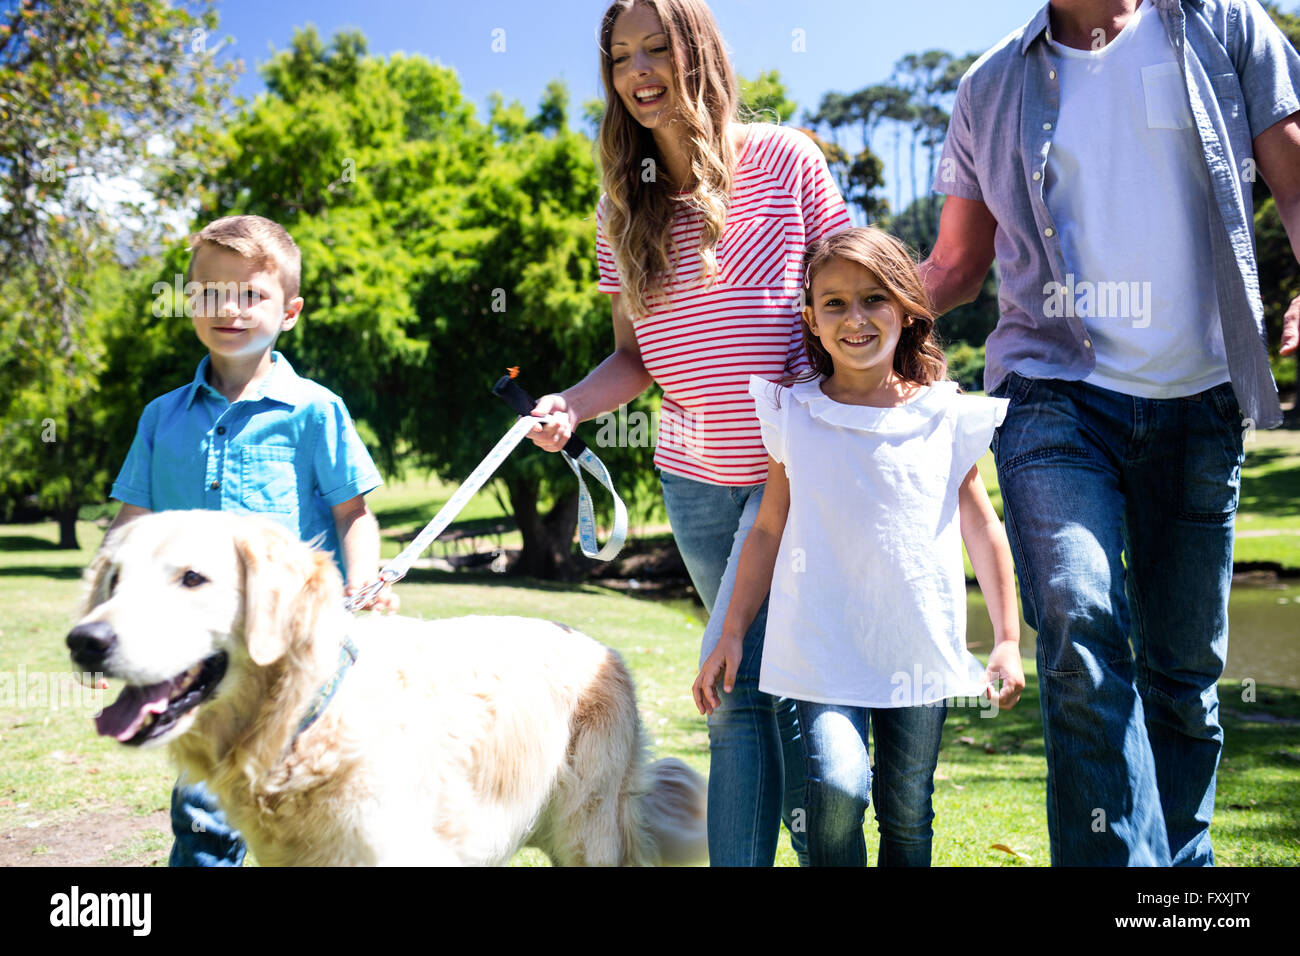 Family walking in the park with their dog Stock Photo